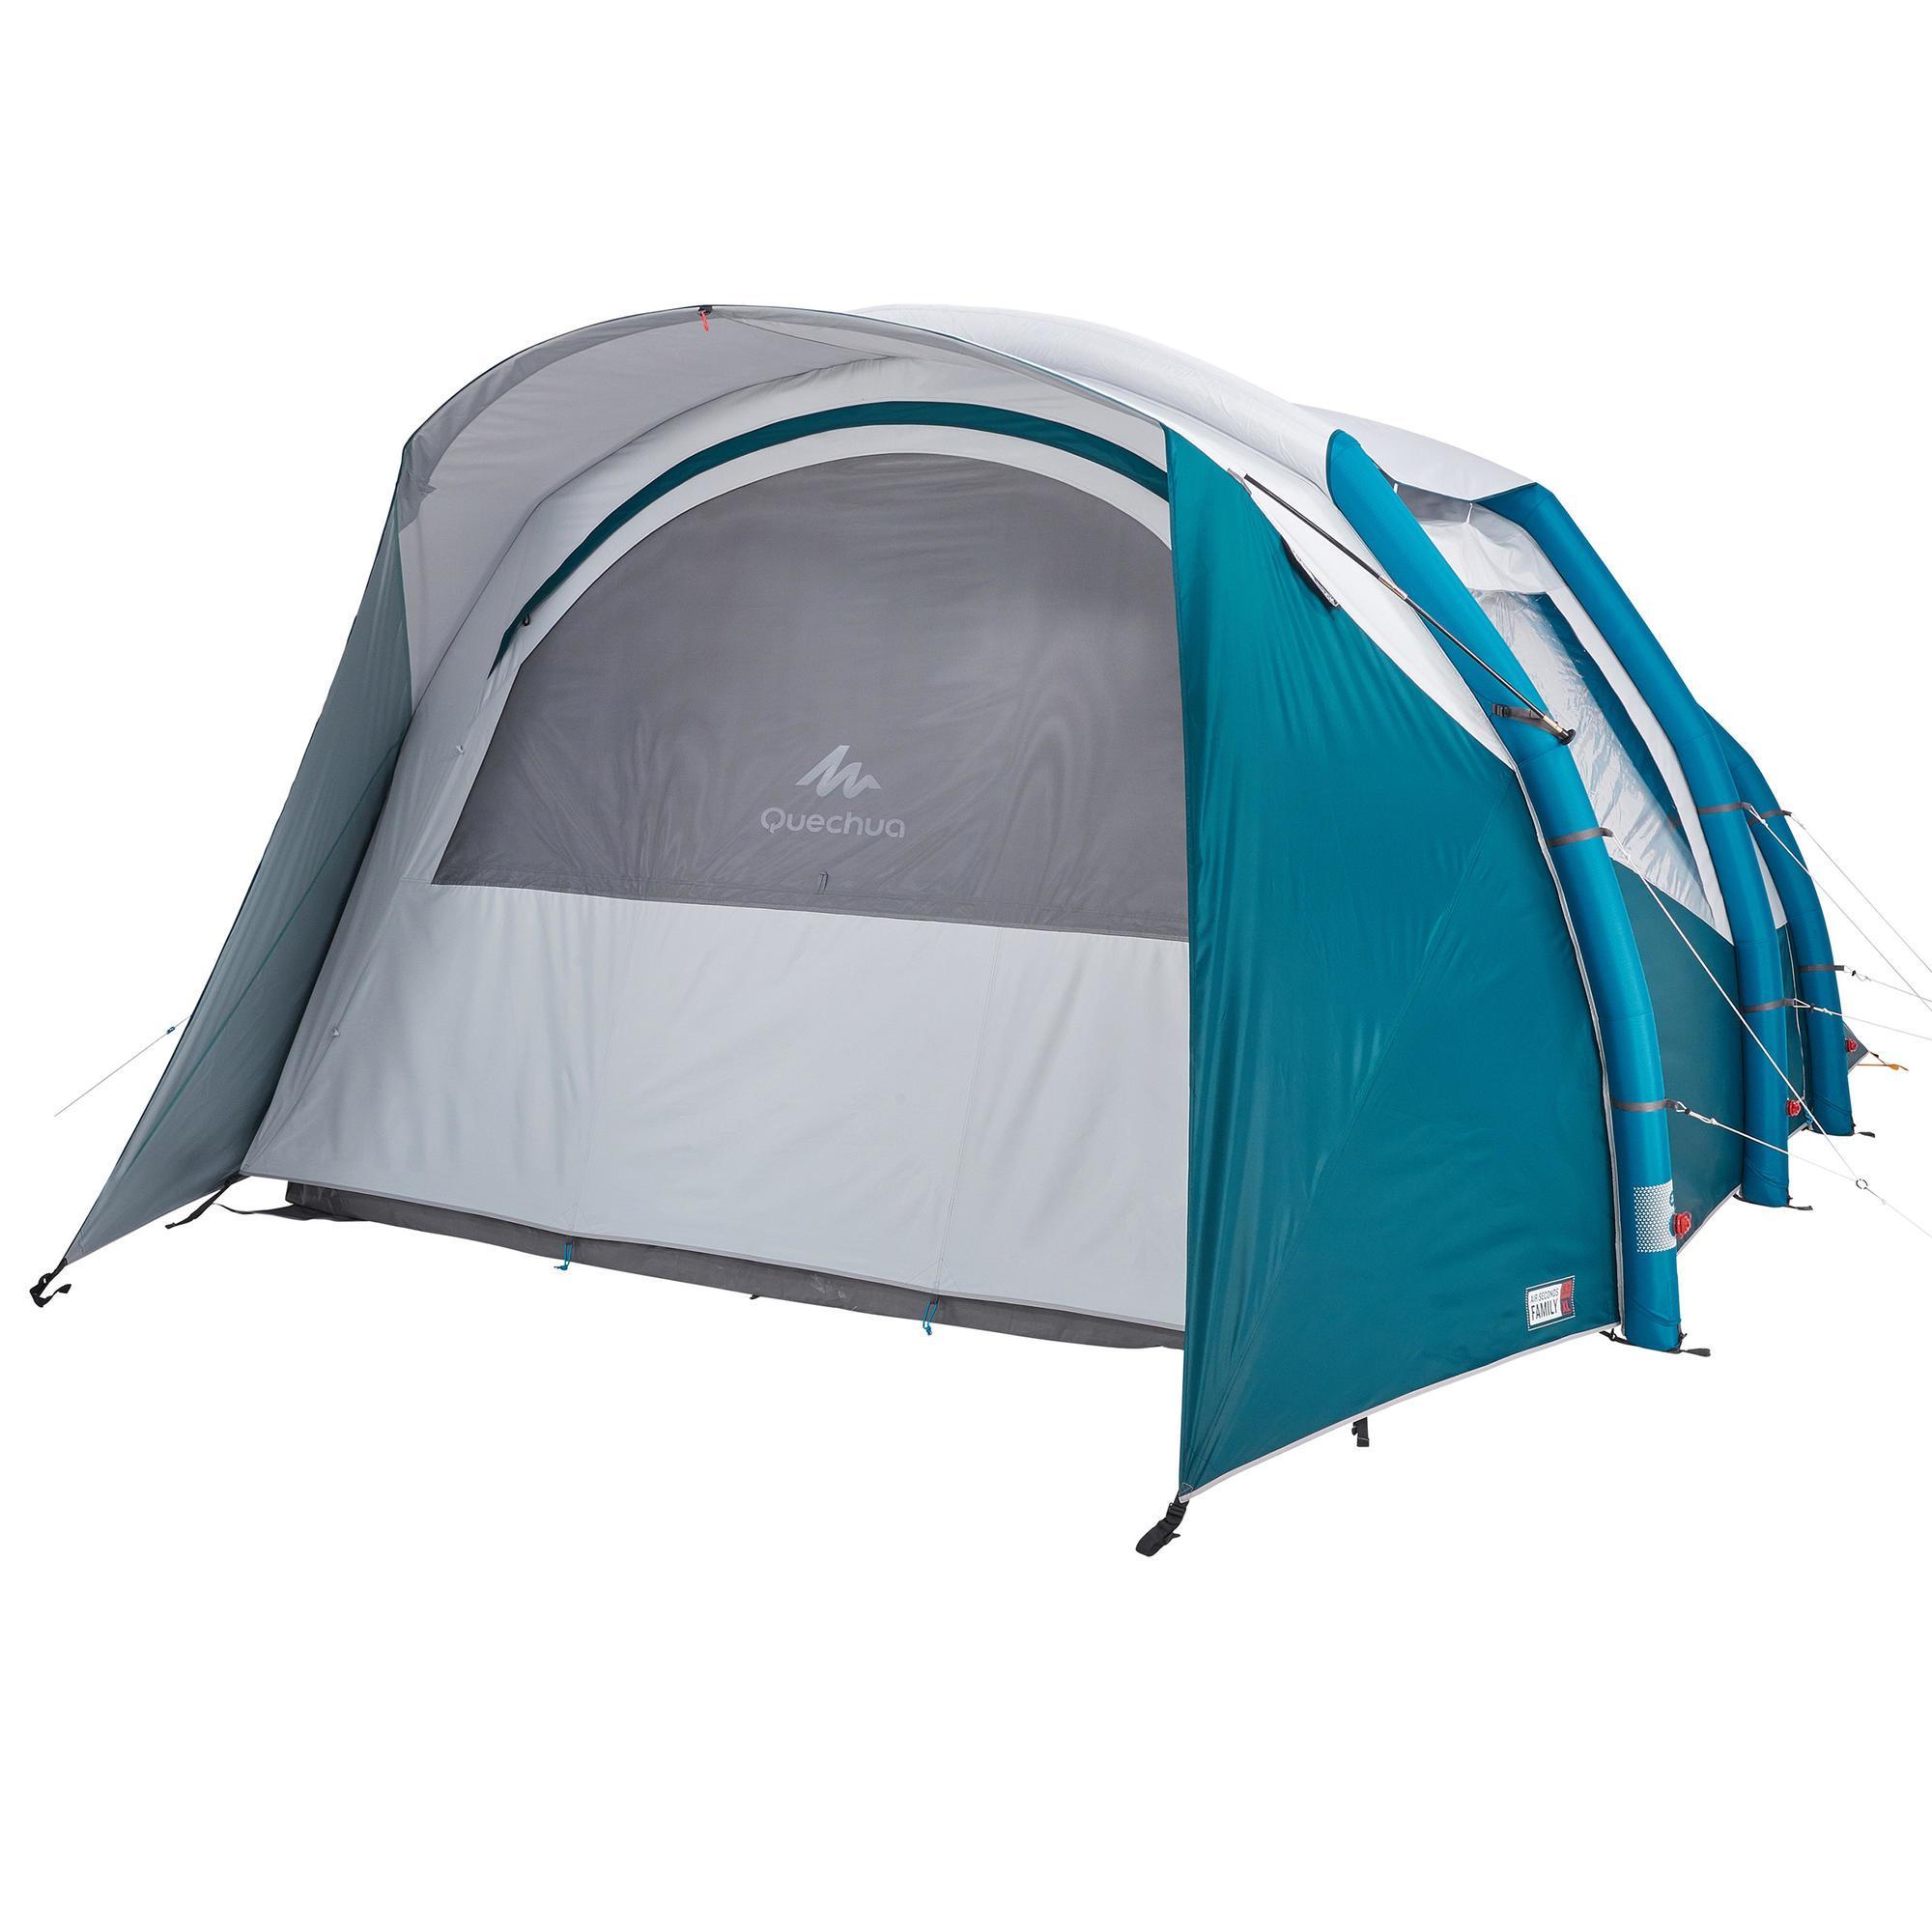 Inflatable camping tent - Air Seconds 5 